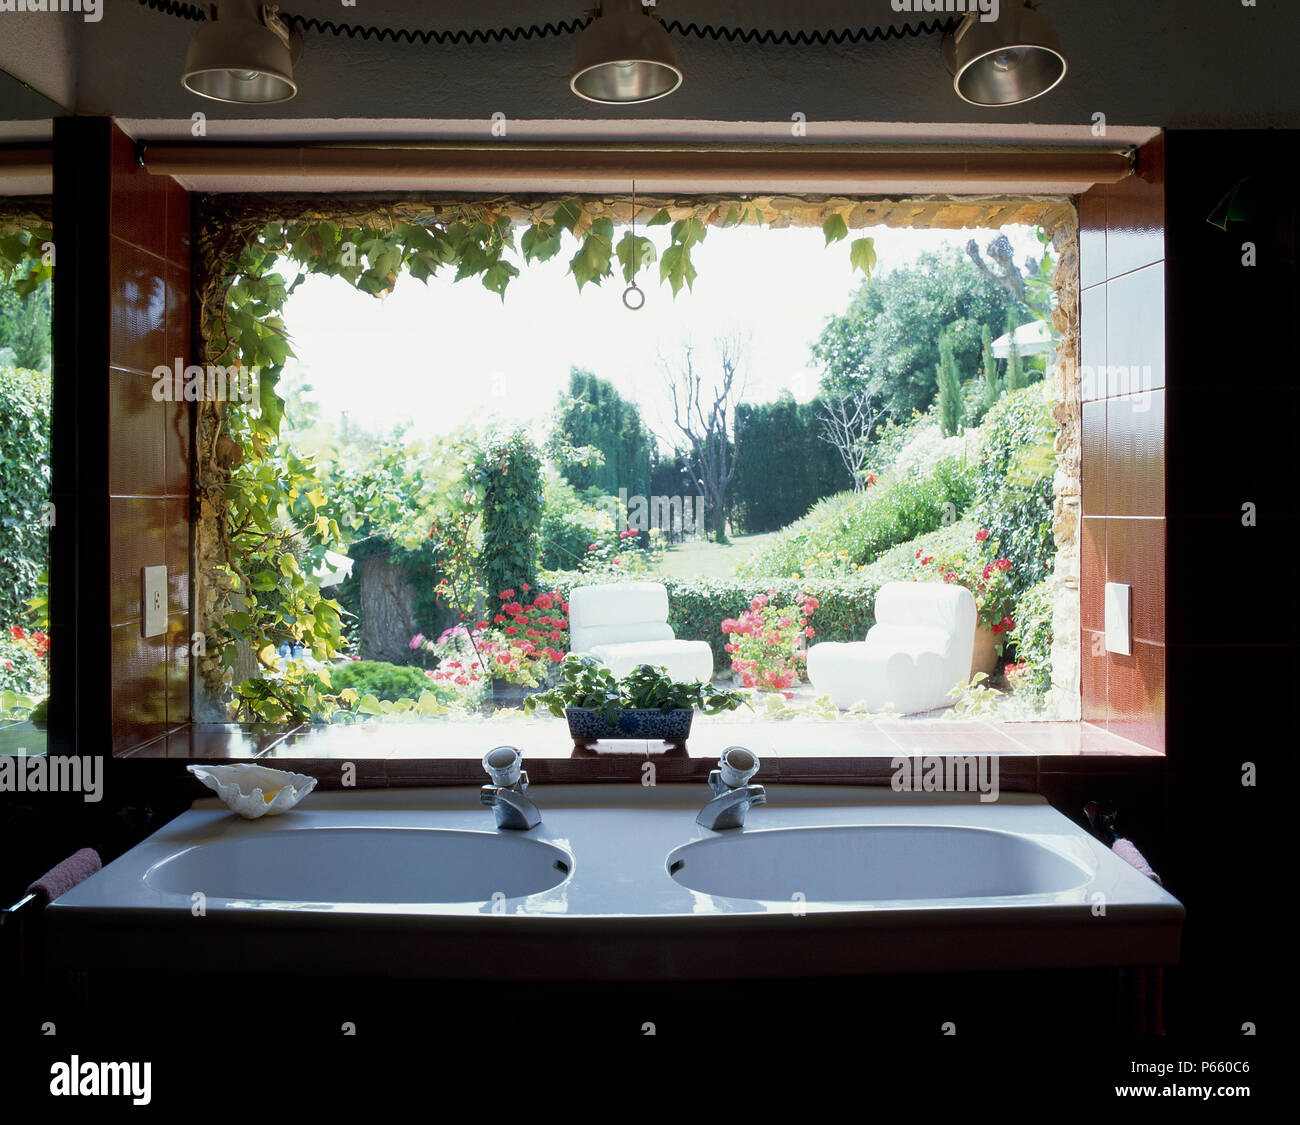 View of two sinks against a window Stock Photo